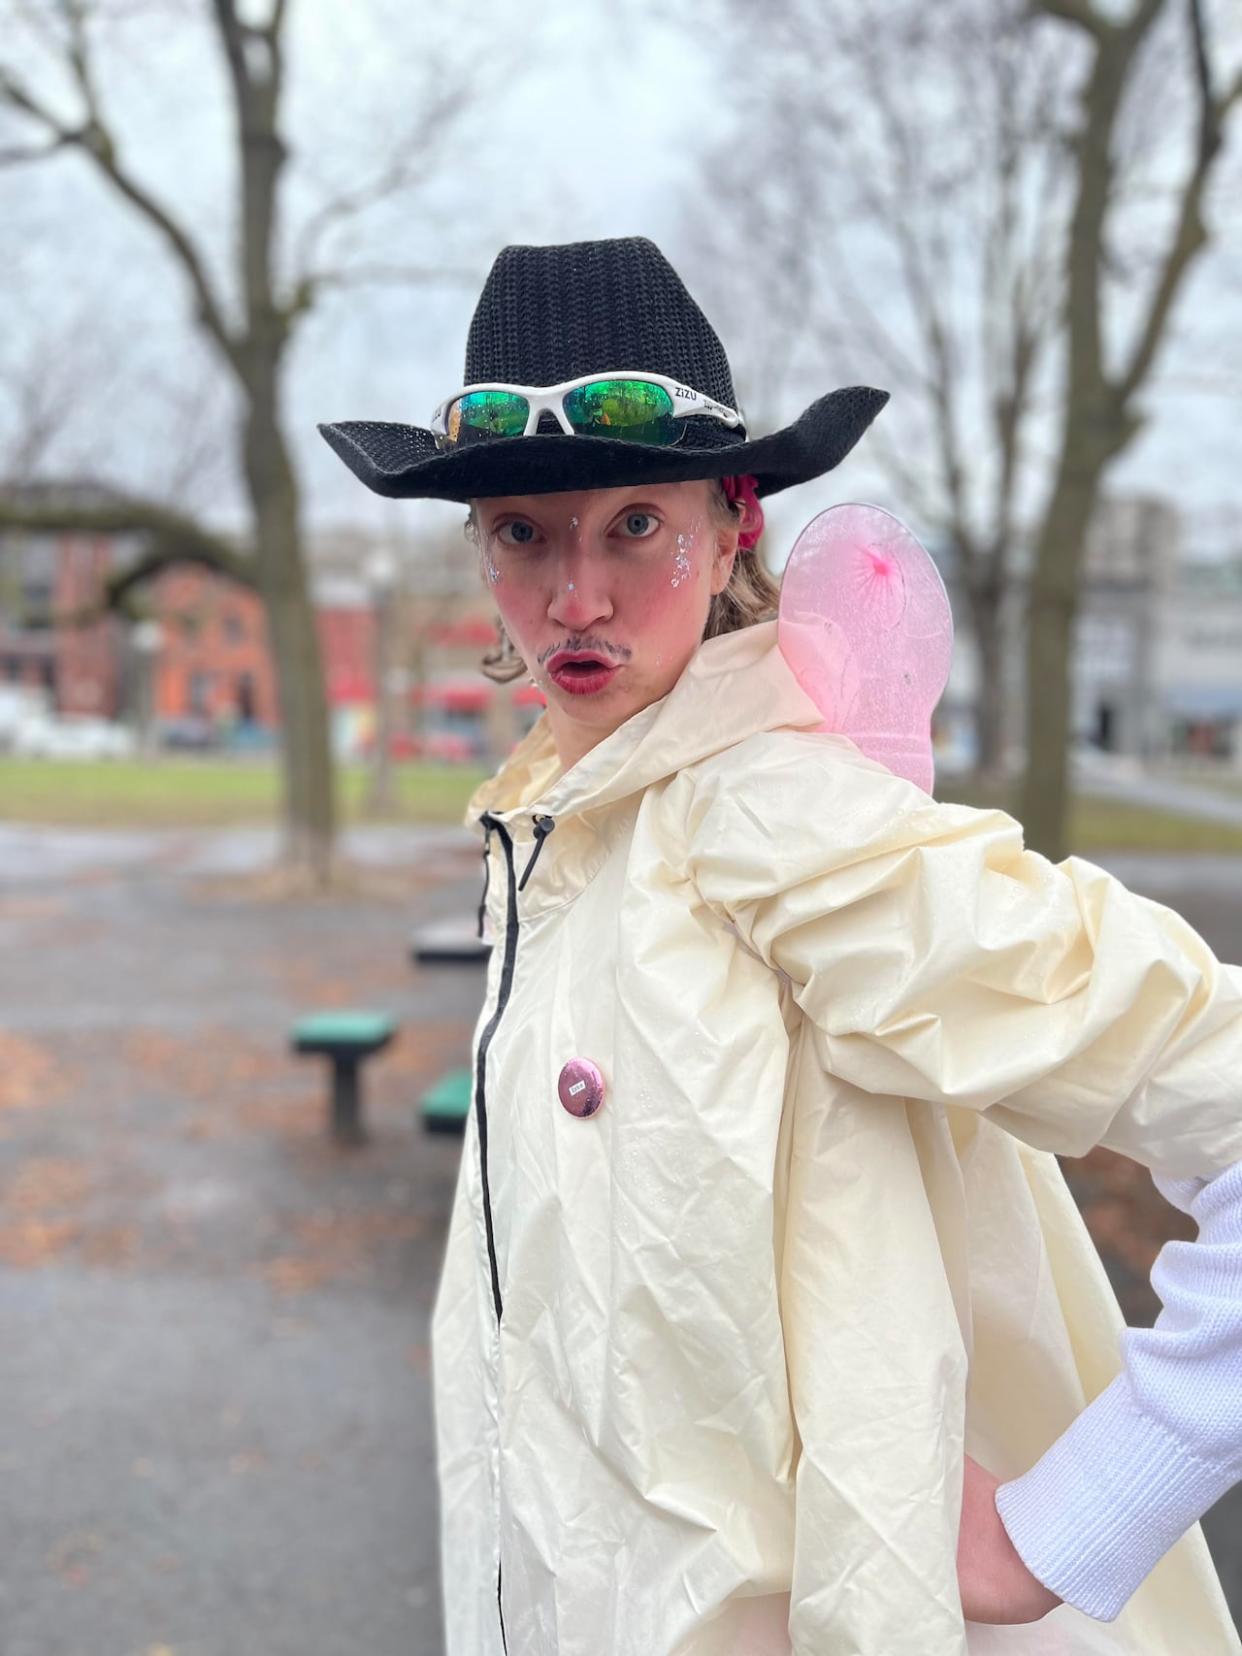 Drag king Morgan mercury dons a cowboy hat and fairy wings for their guided walking tours of Centretown. The tours, which began earlier in 2024, are intended to showcase the queer history of the downtown Ottawa neighbourhood. (Maggie May Harder - image credit)